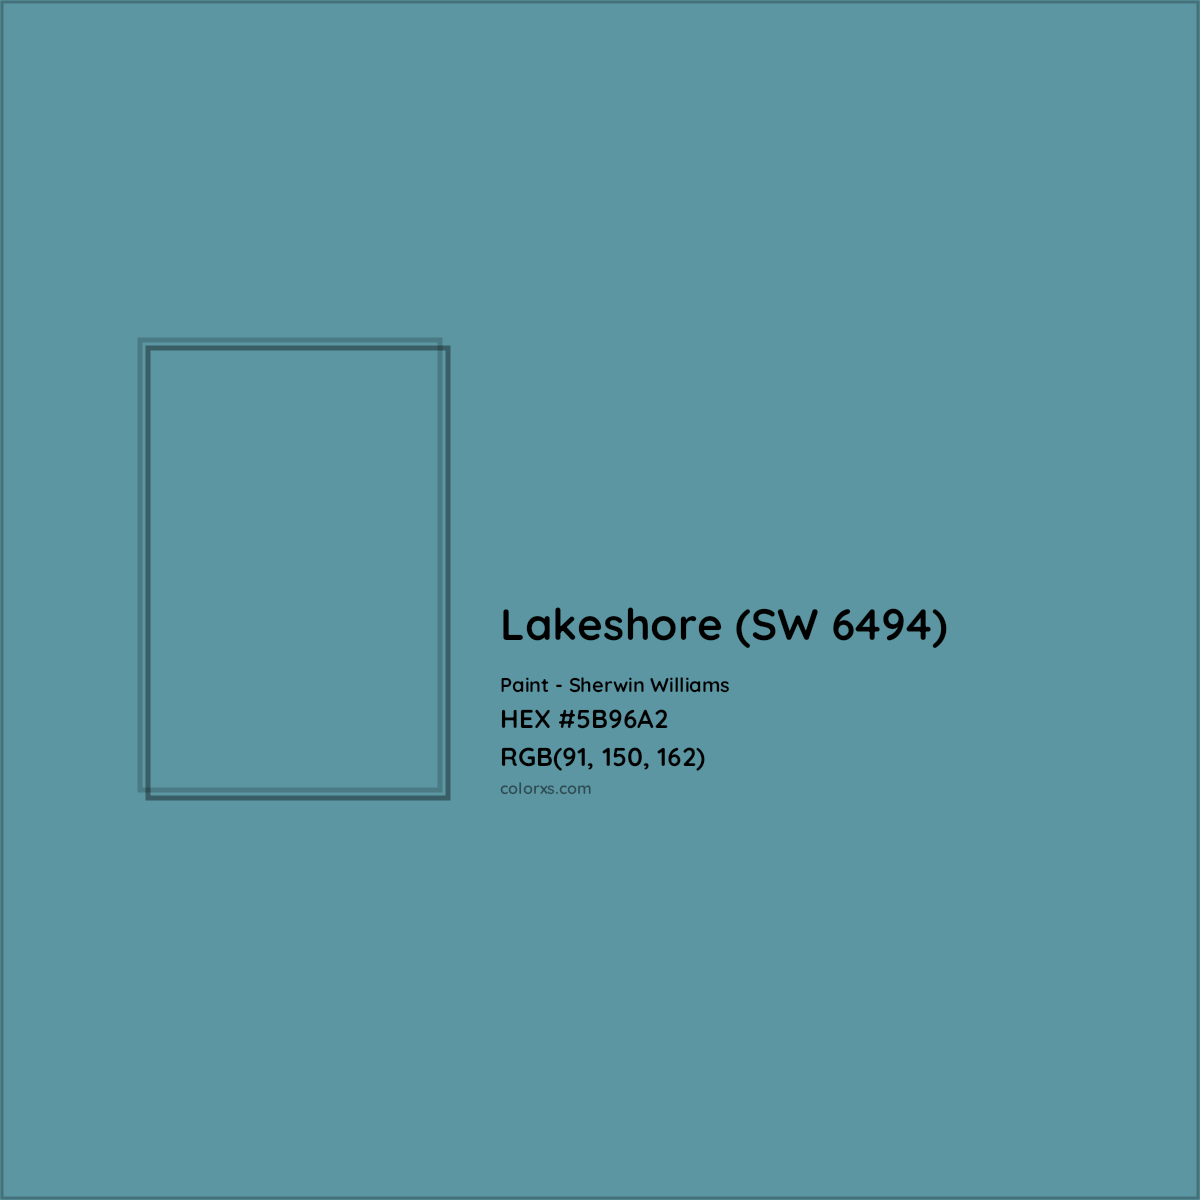 HEX #5B96A2 Lakeshore (SW 6494) Paint Sherwin Williams - Color Code